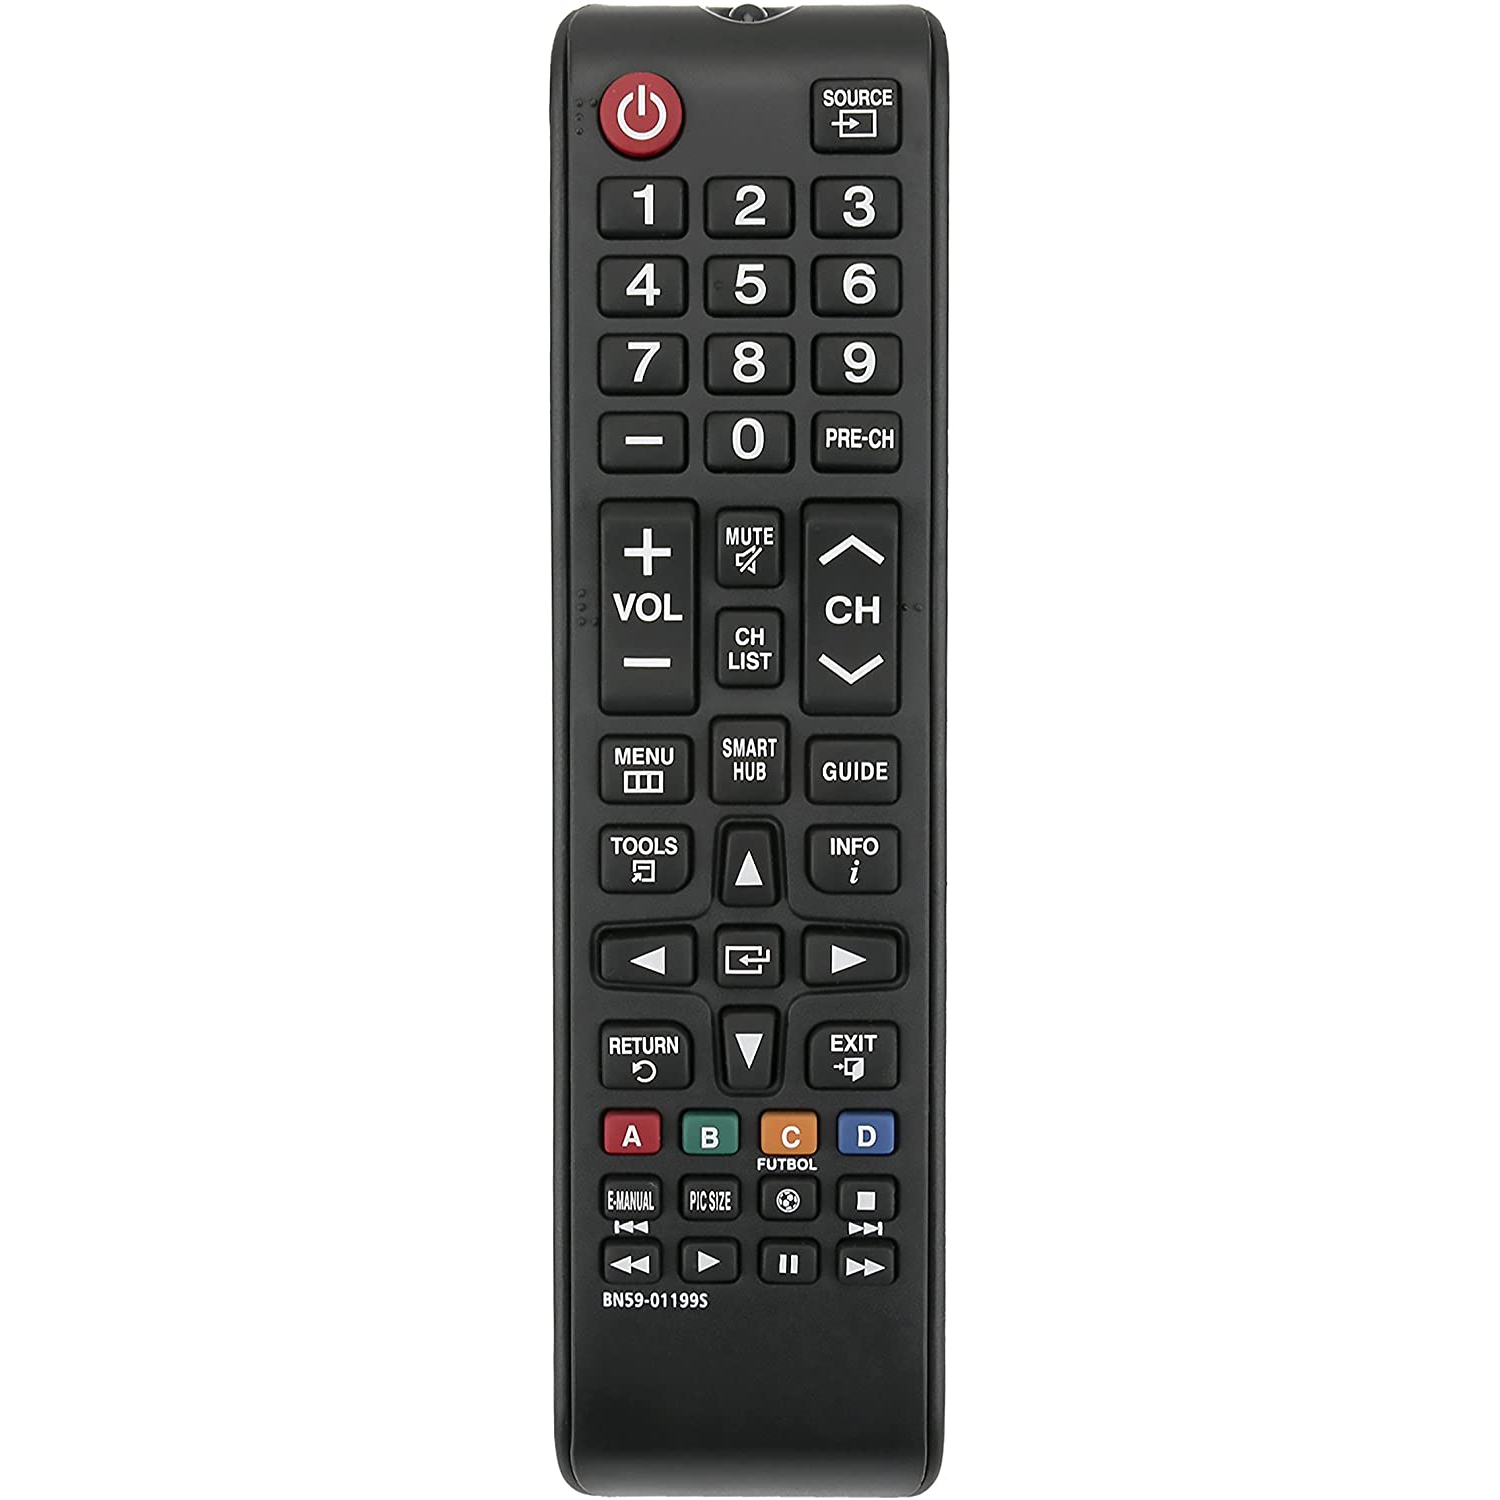 New BN59-01199S Replace Remote fit for Samsung Smart TV UN32J5205AF UN32J5205AFXZA UN40J6200AF UN40J6200AFXZA UN48J6200AF UN48J6200AFXZA UN50J6200AF UN50J6200AFXZA UN55J6200AF UN55J6200AFXZA